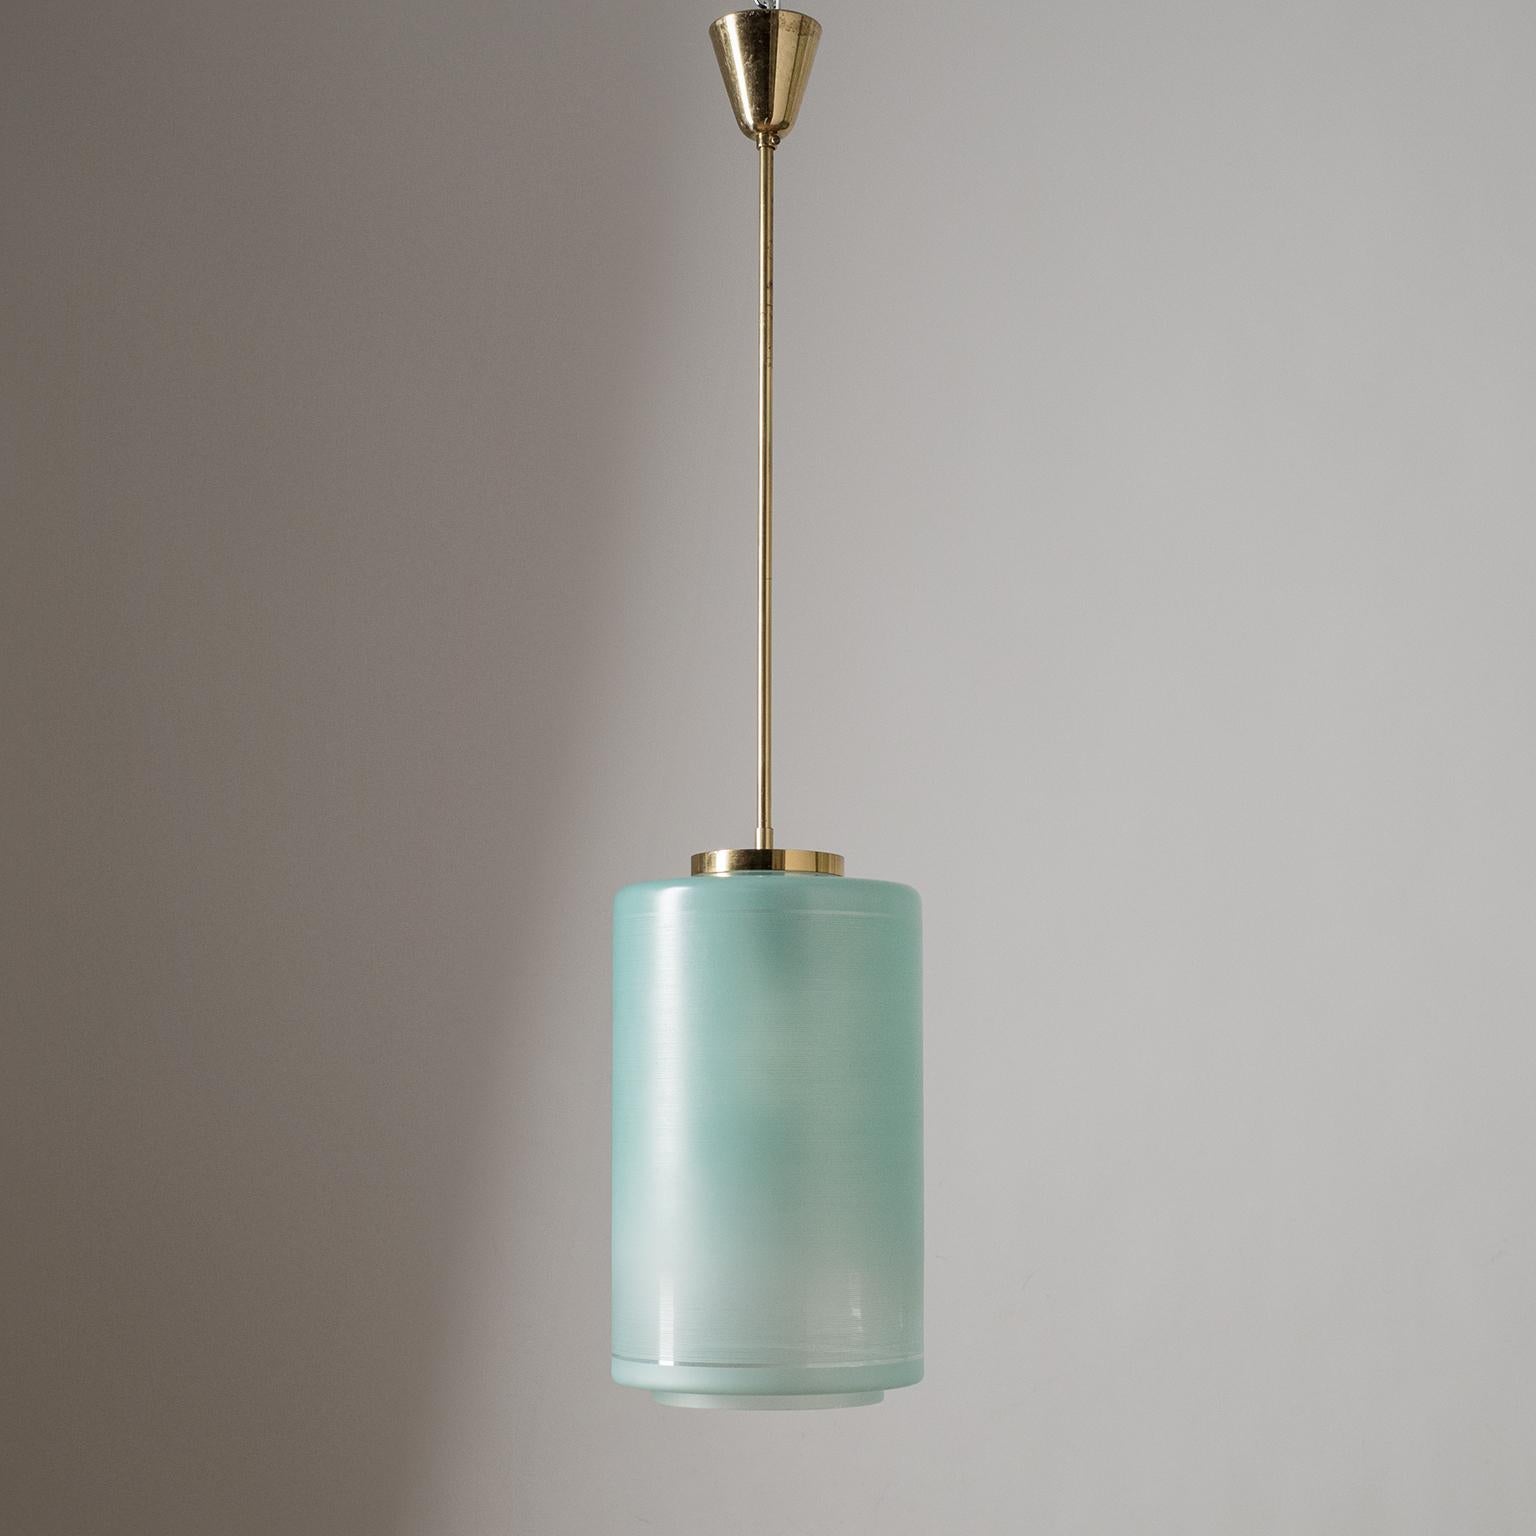 Italian pendant/lantern, circa 1960, with a large glass diffuser, enameled in aquamarine or turquoise pinstripes. One original brass and ceramic E27 socket with new wiring. Height without the stem is 14.5inches/37cm.